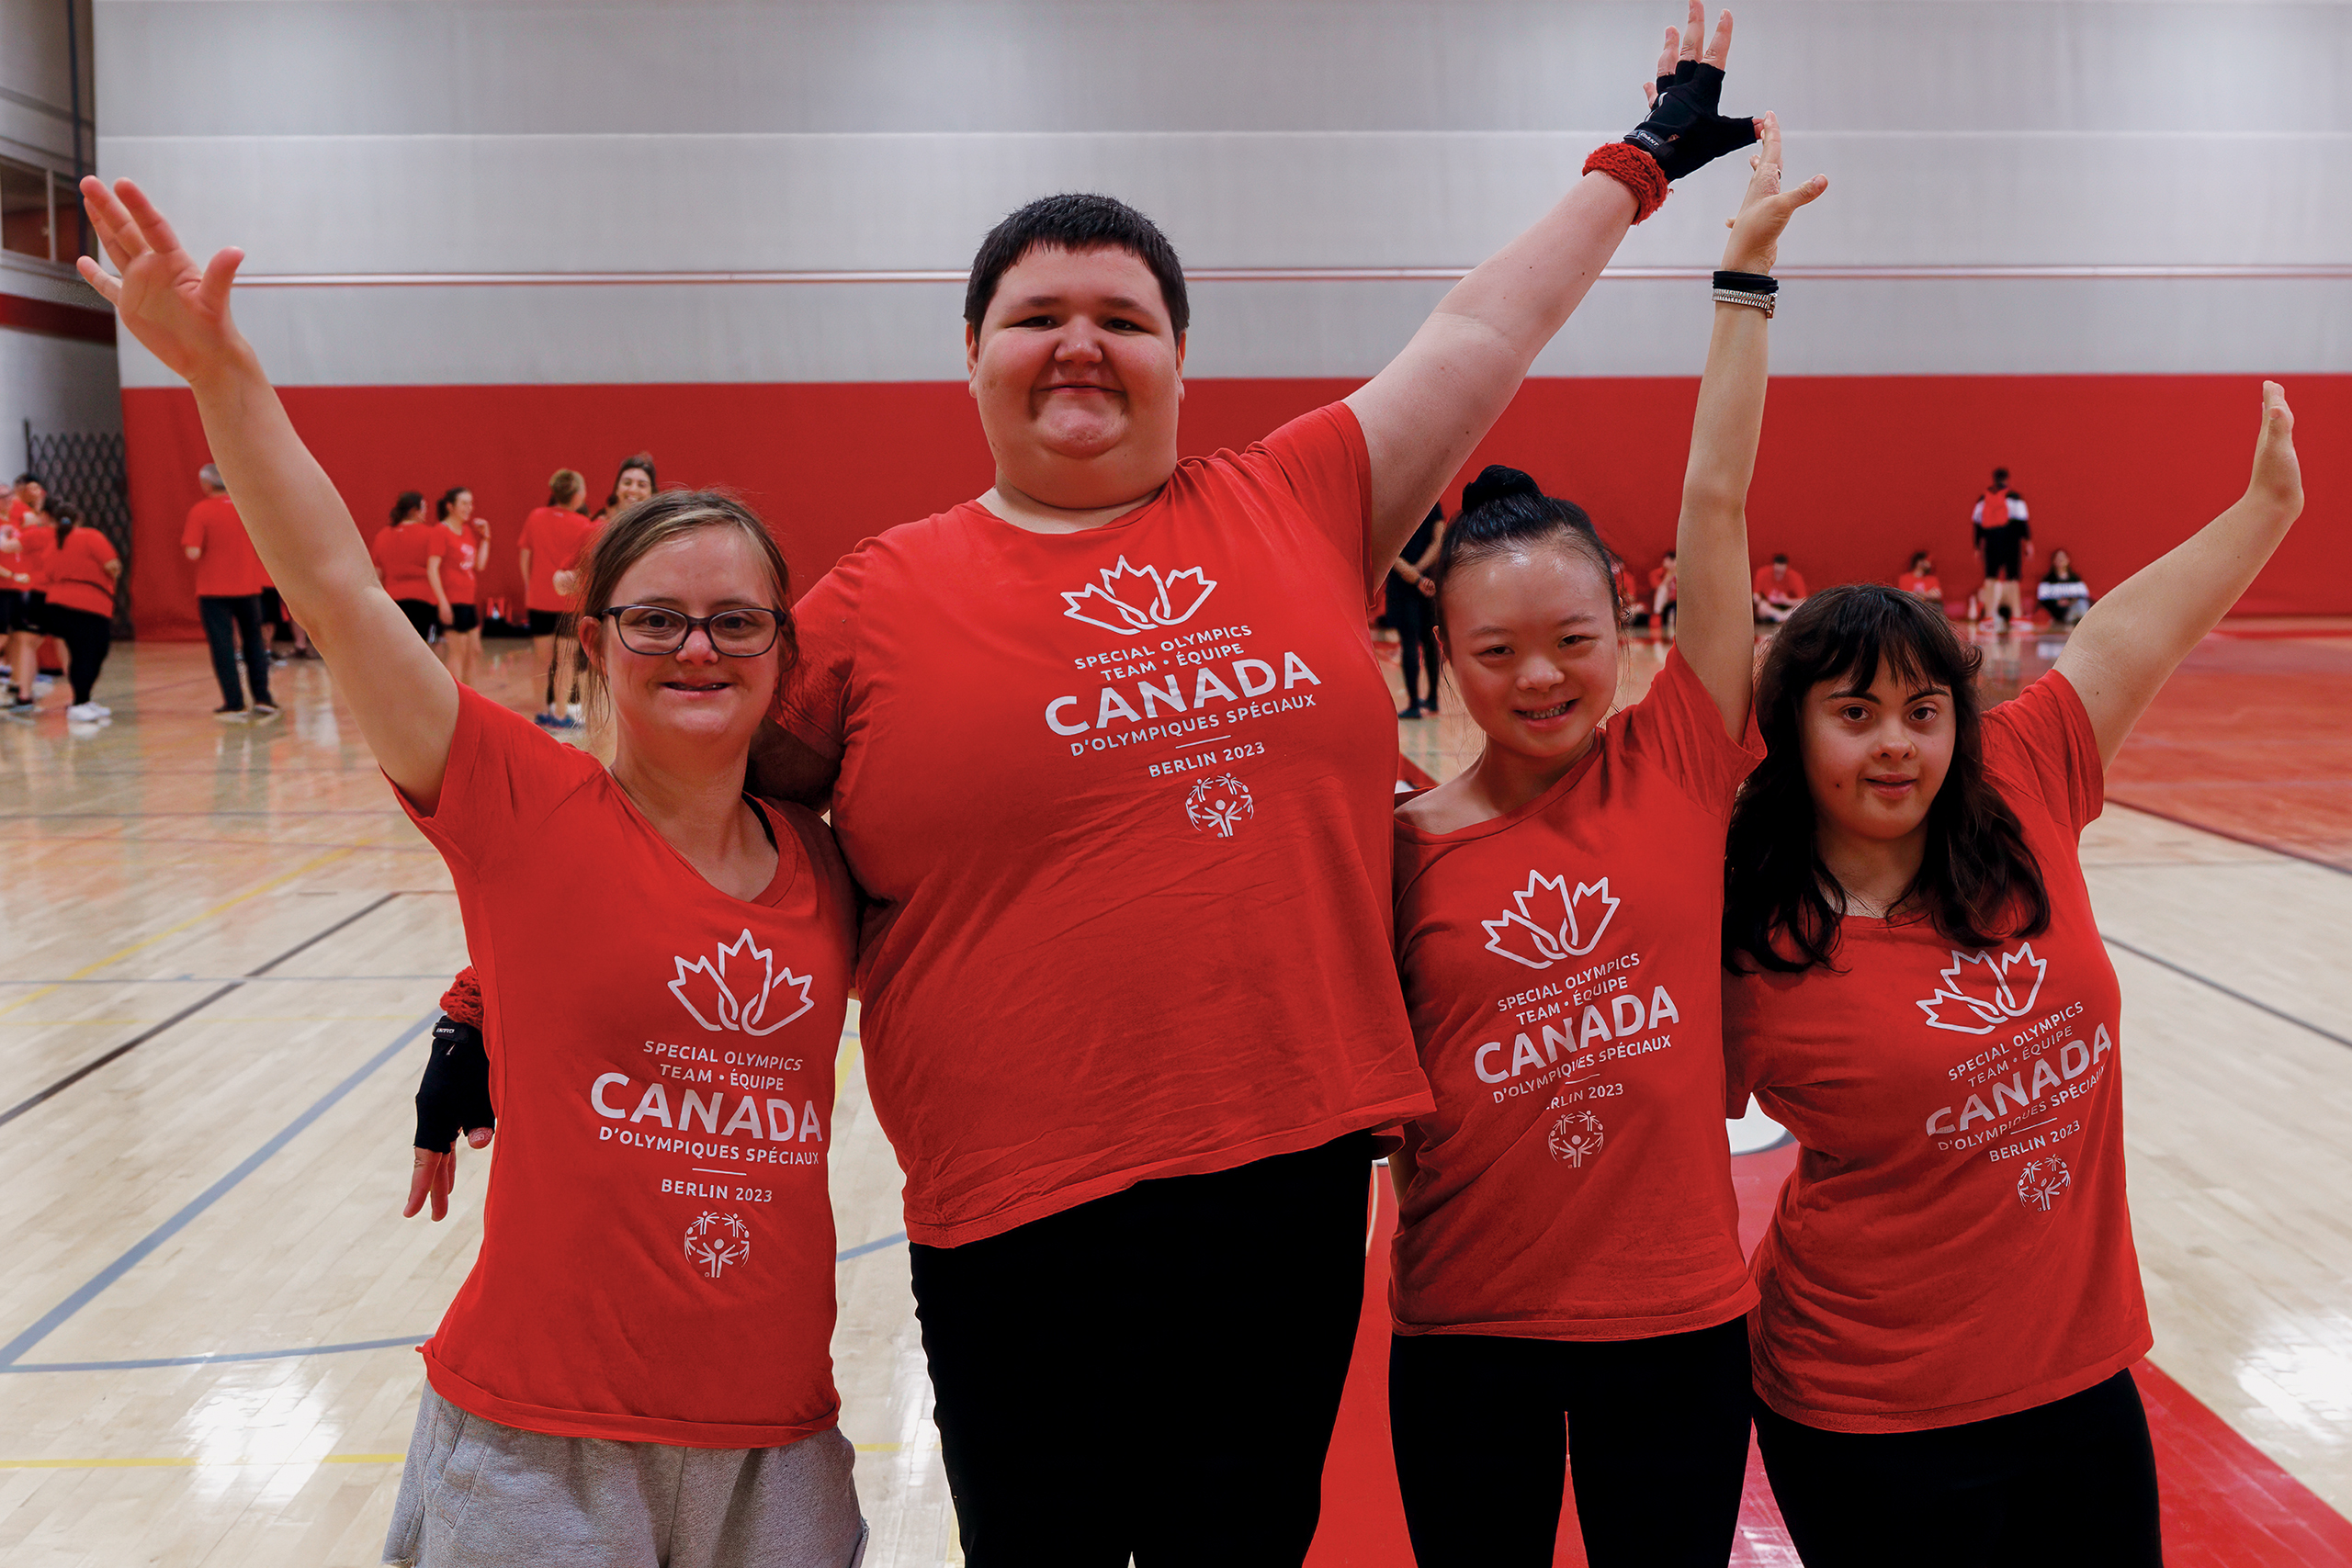 Special Olympics Team Canada's Rhythmic Gymnastics Team at the final June staging camp in Toronto, before departing for the 2023 World Games.